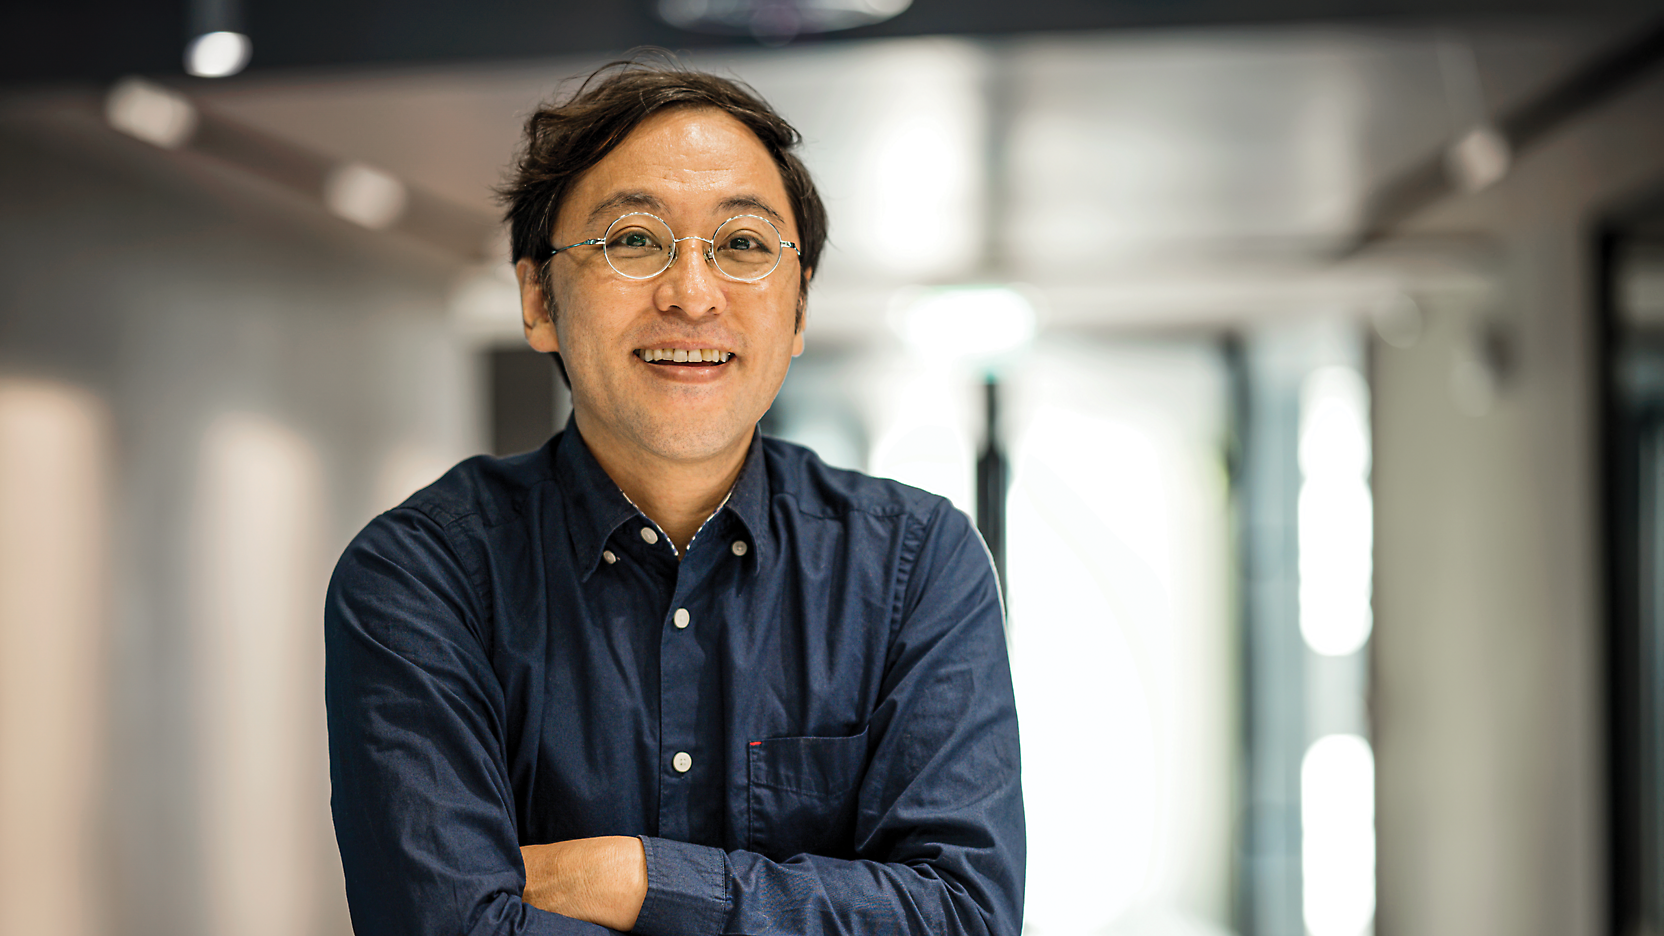 A middle-aged asian man in a blue shirt smiling confidently, arms crossed, standing in an office corridor.